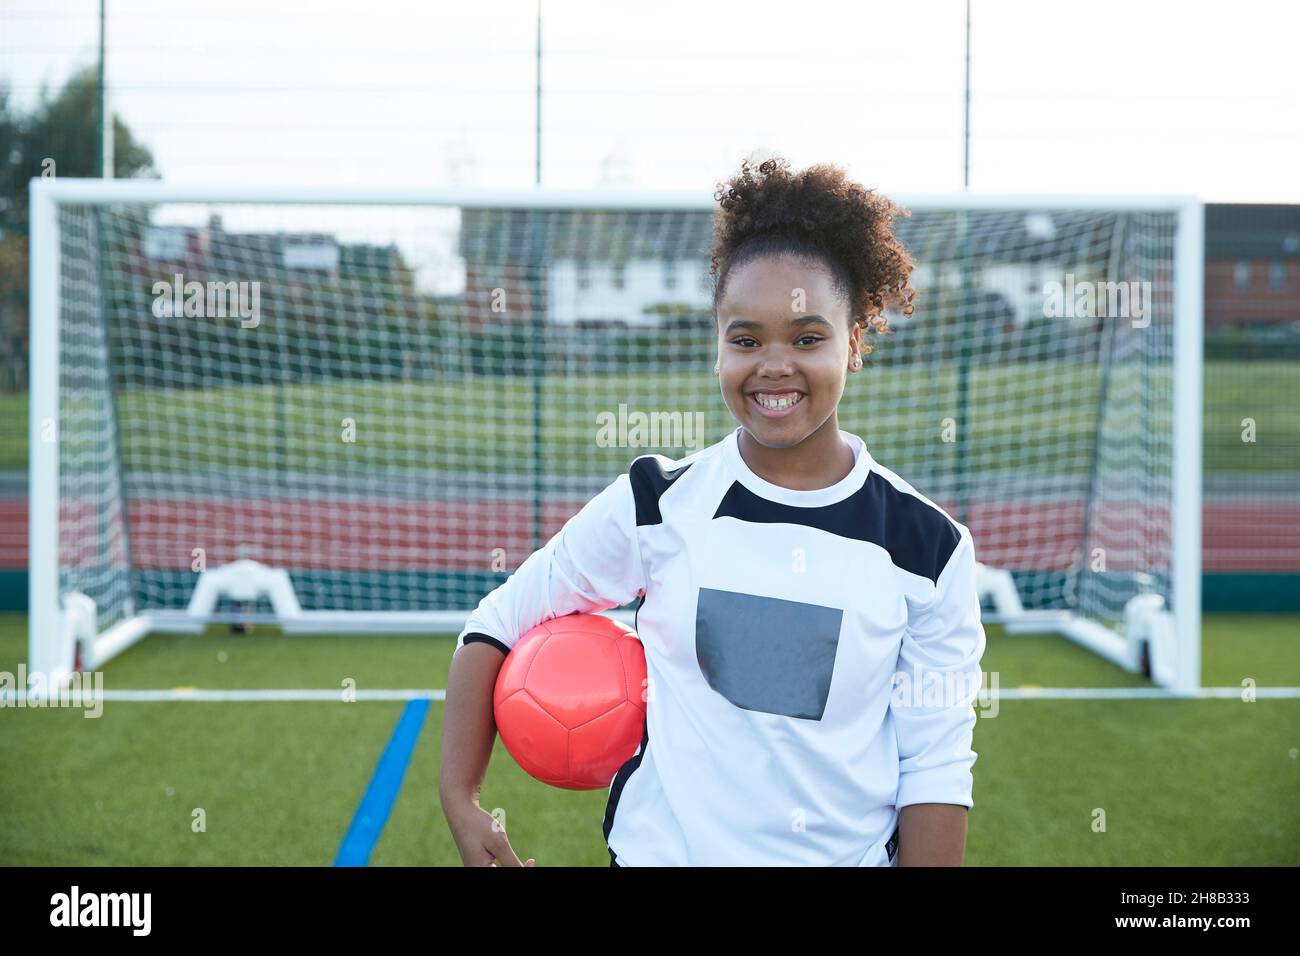 UK, Portrait of smiling female soccer player (12-13) in front of goal Stock Photo